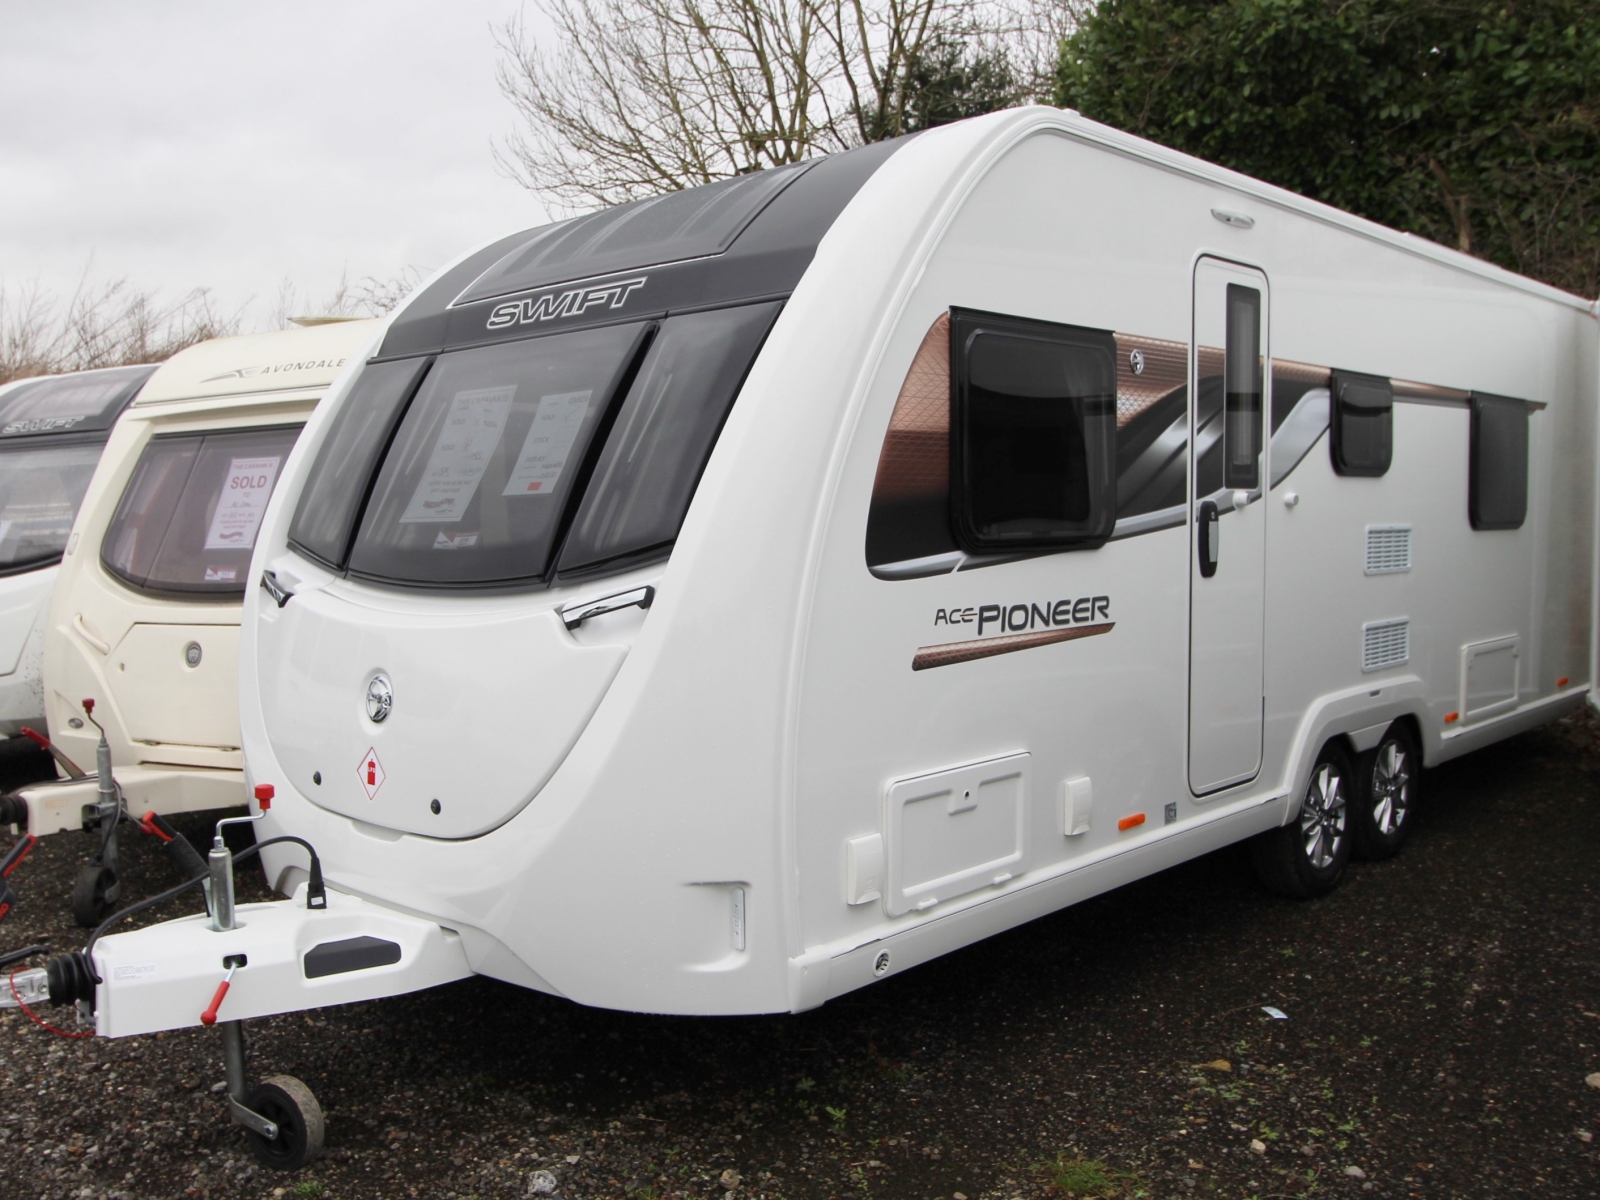 Swift Ace Pioneer 2020 - Wandahome Special Edition image